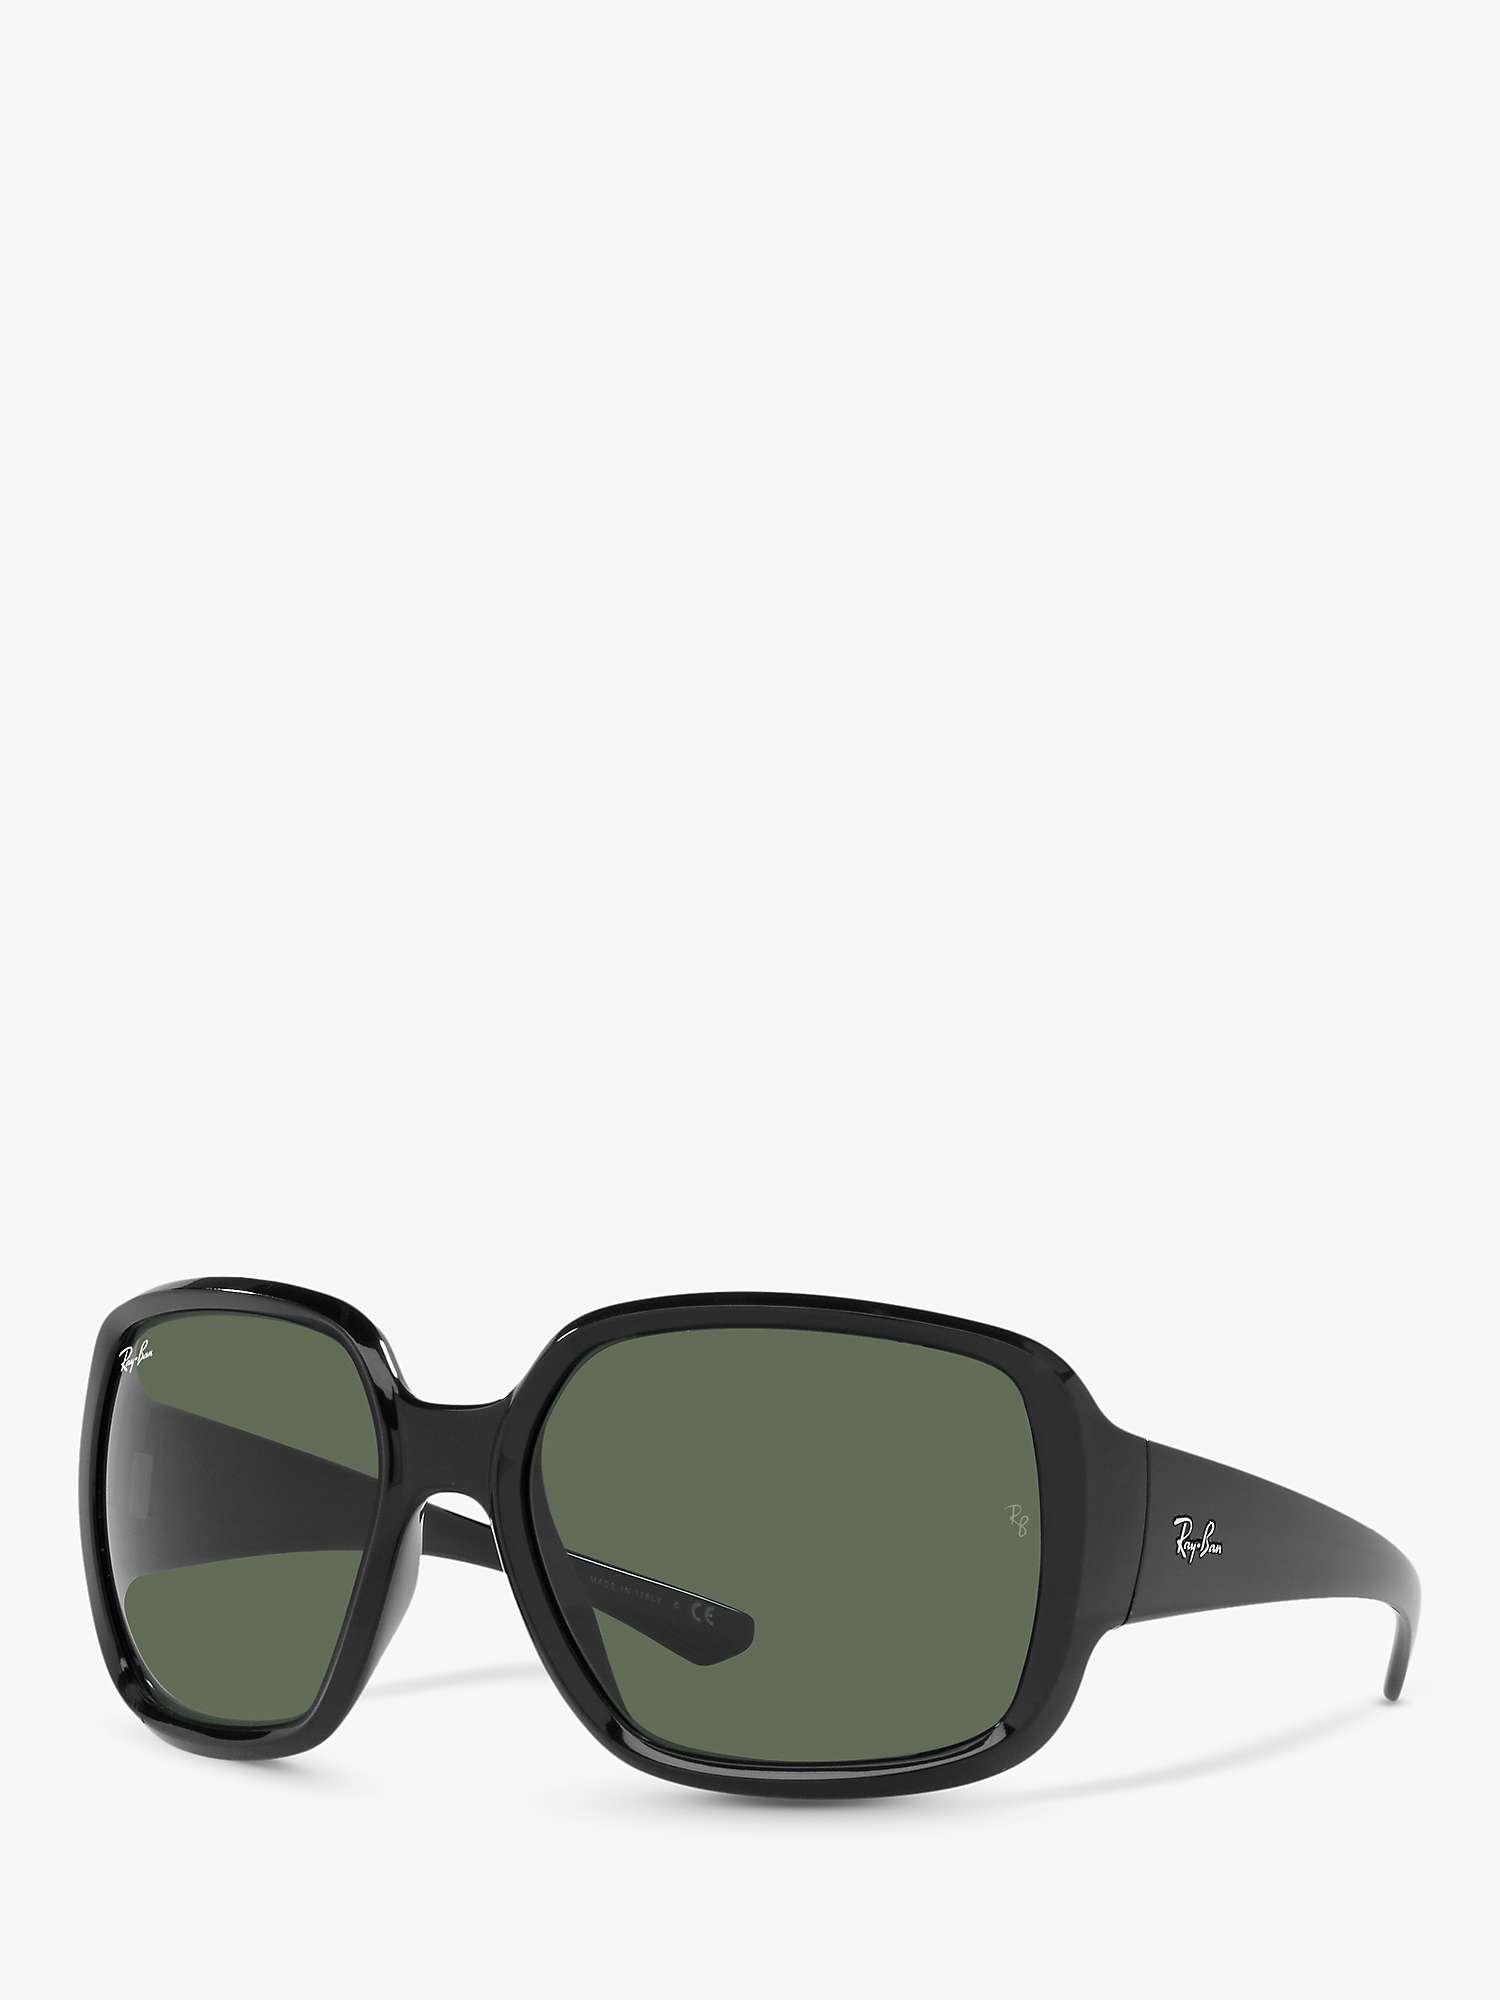 Buy Ray-Ban RB4347 Unisex Square Sunglasses, Black/Green Classic Online at johnlewis.com